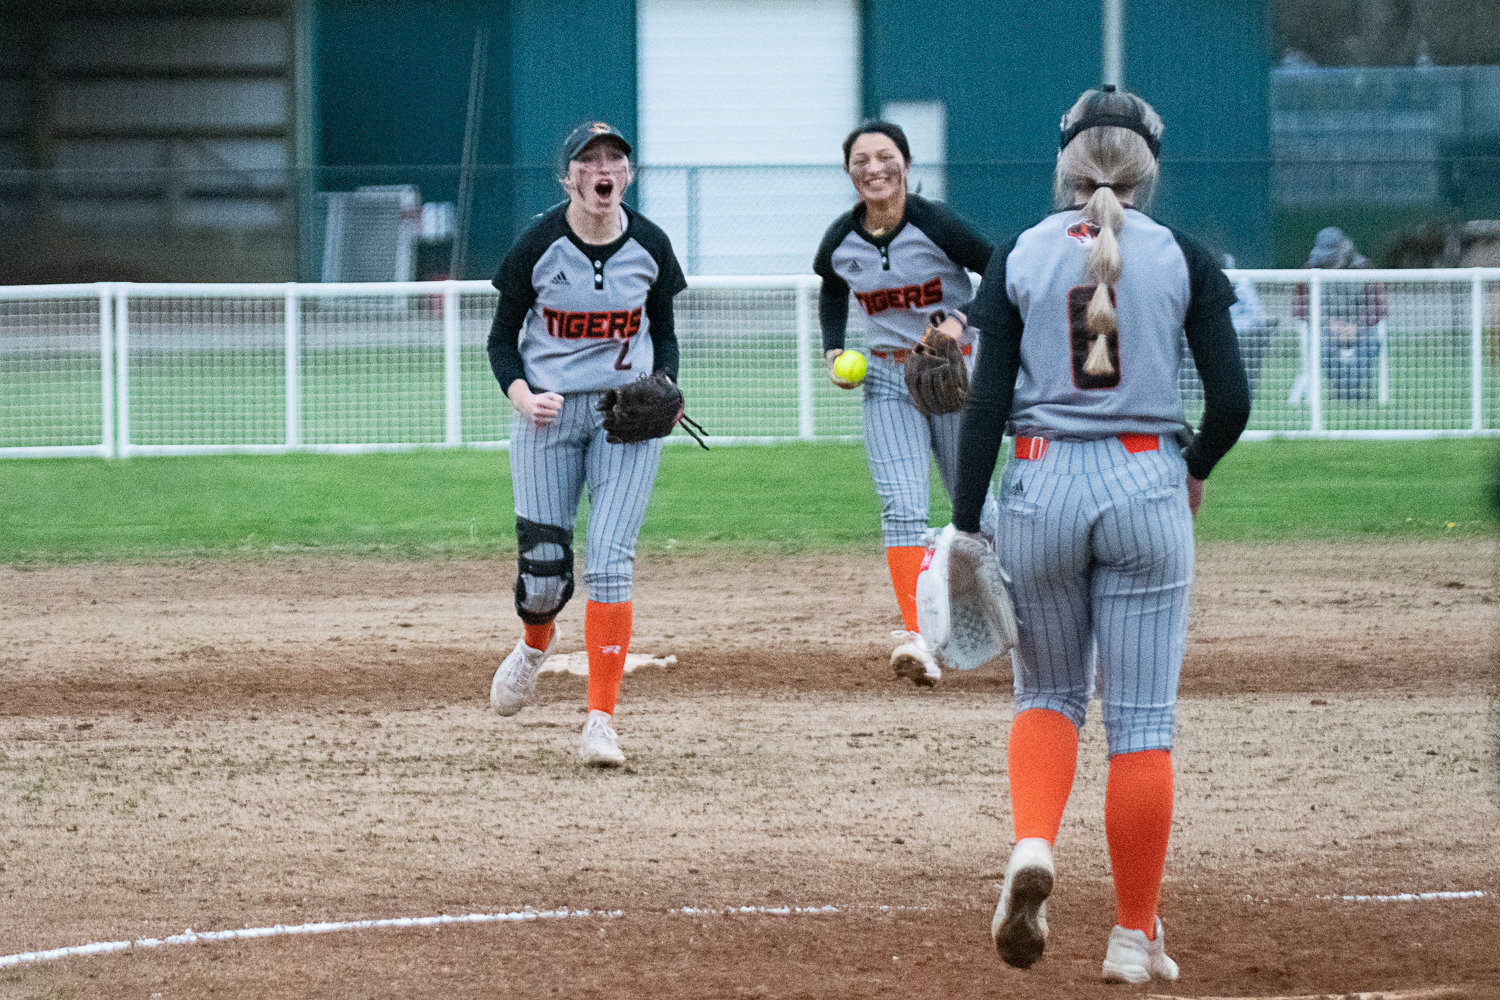 Lauren Wasson celebrates after Makayla Chavez made the final out of Centralia's 5-3 win over W.F. West on March 28.